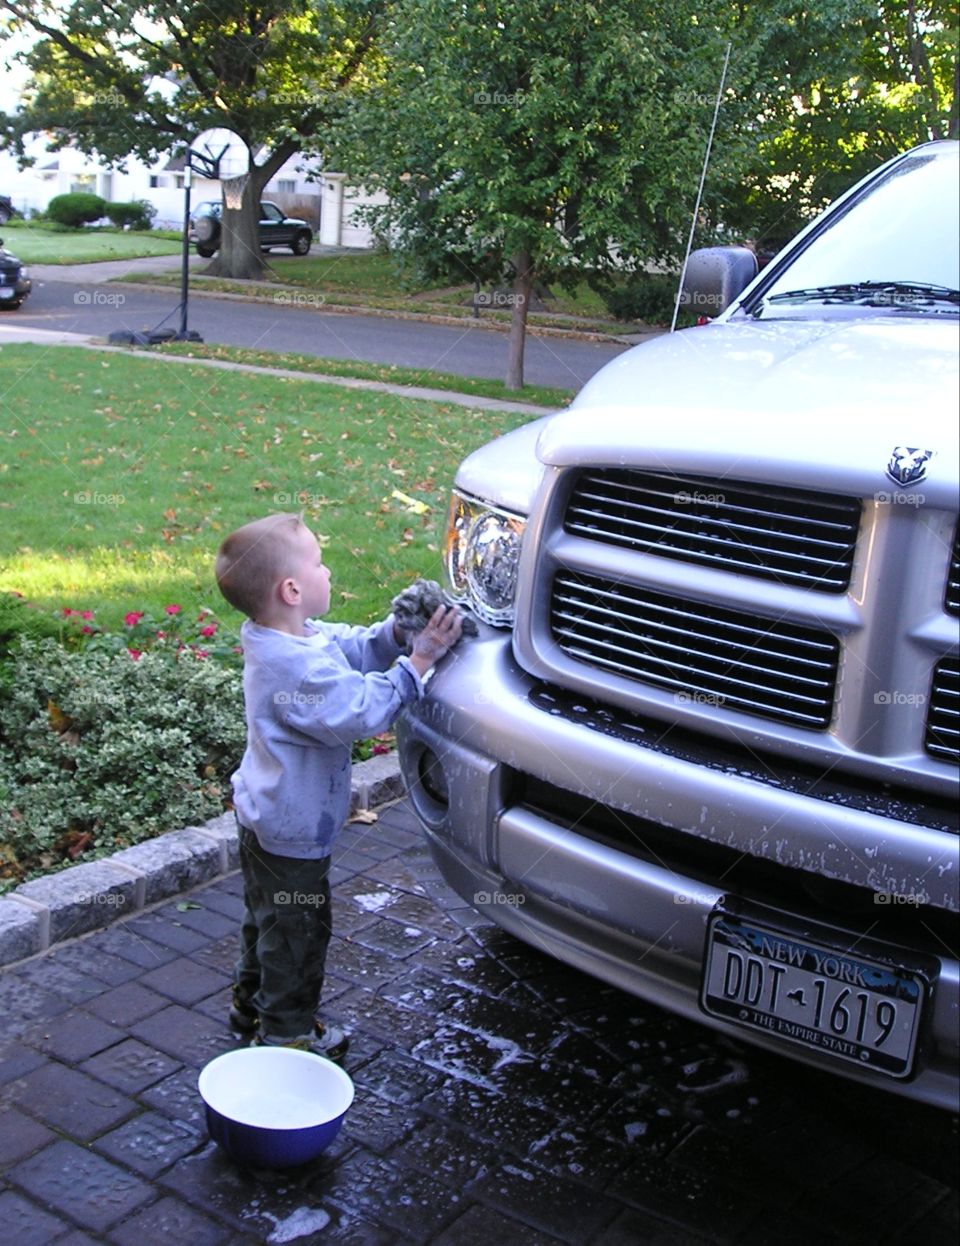 Washing the Ford